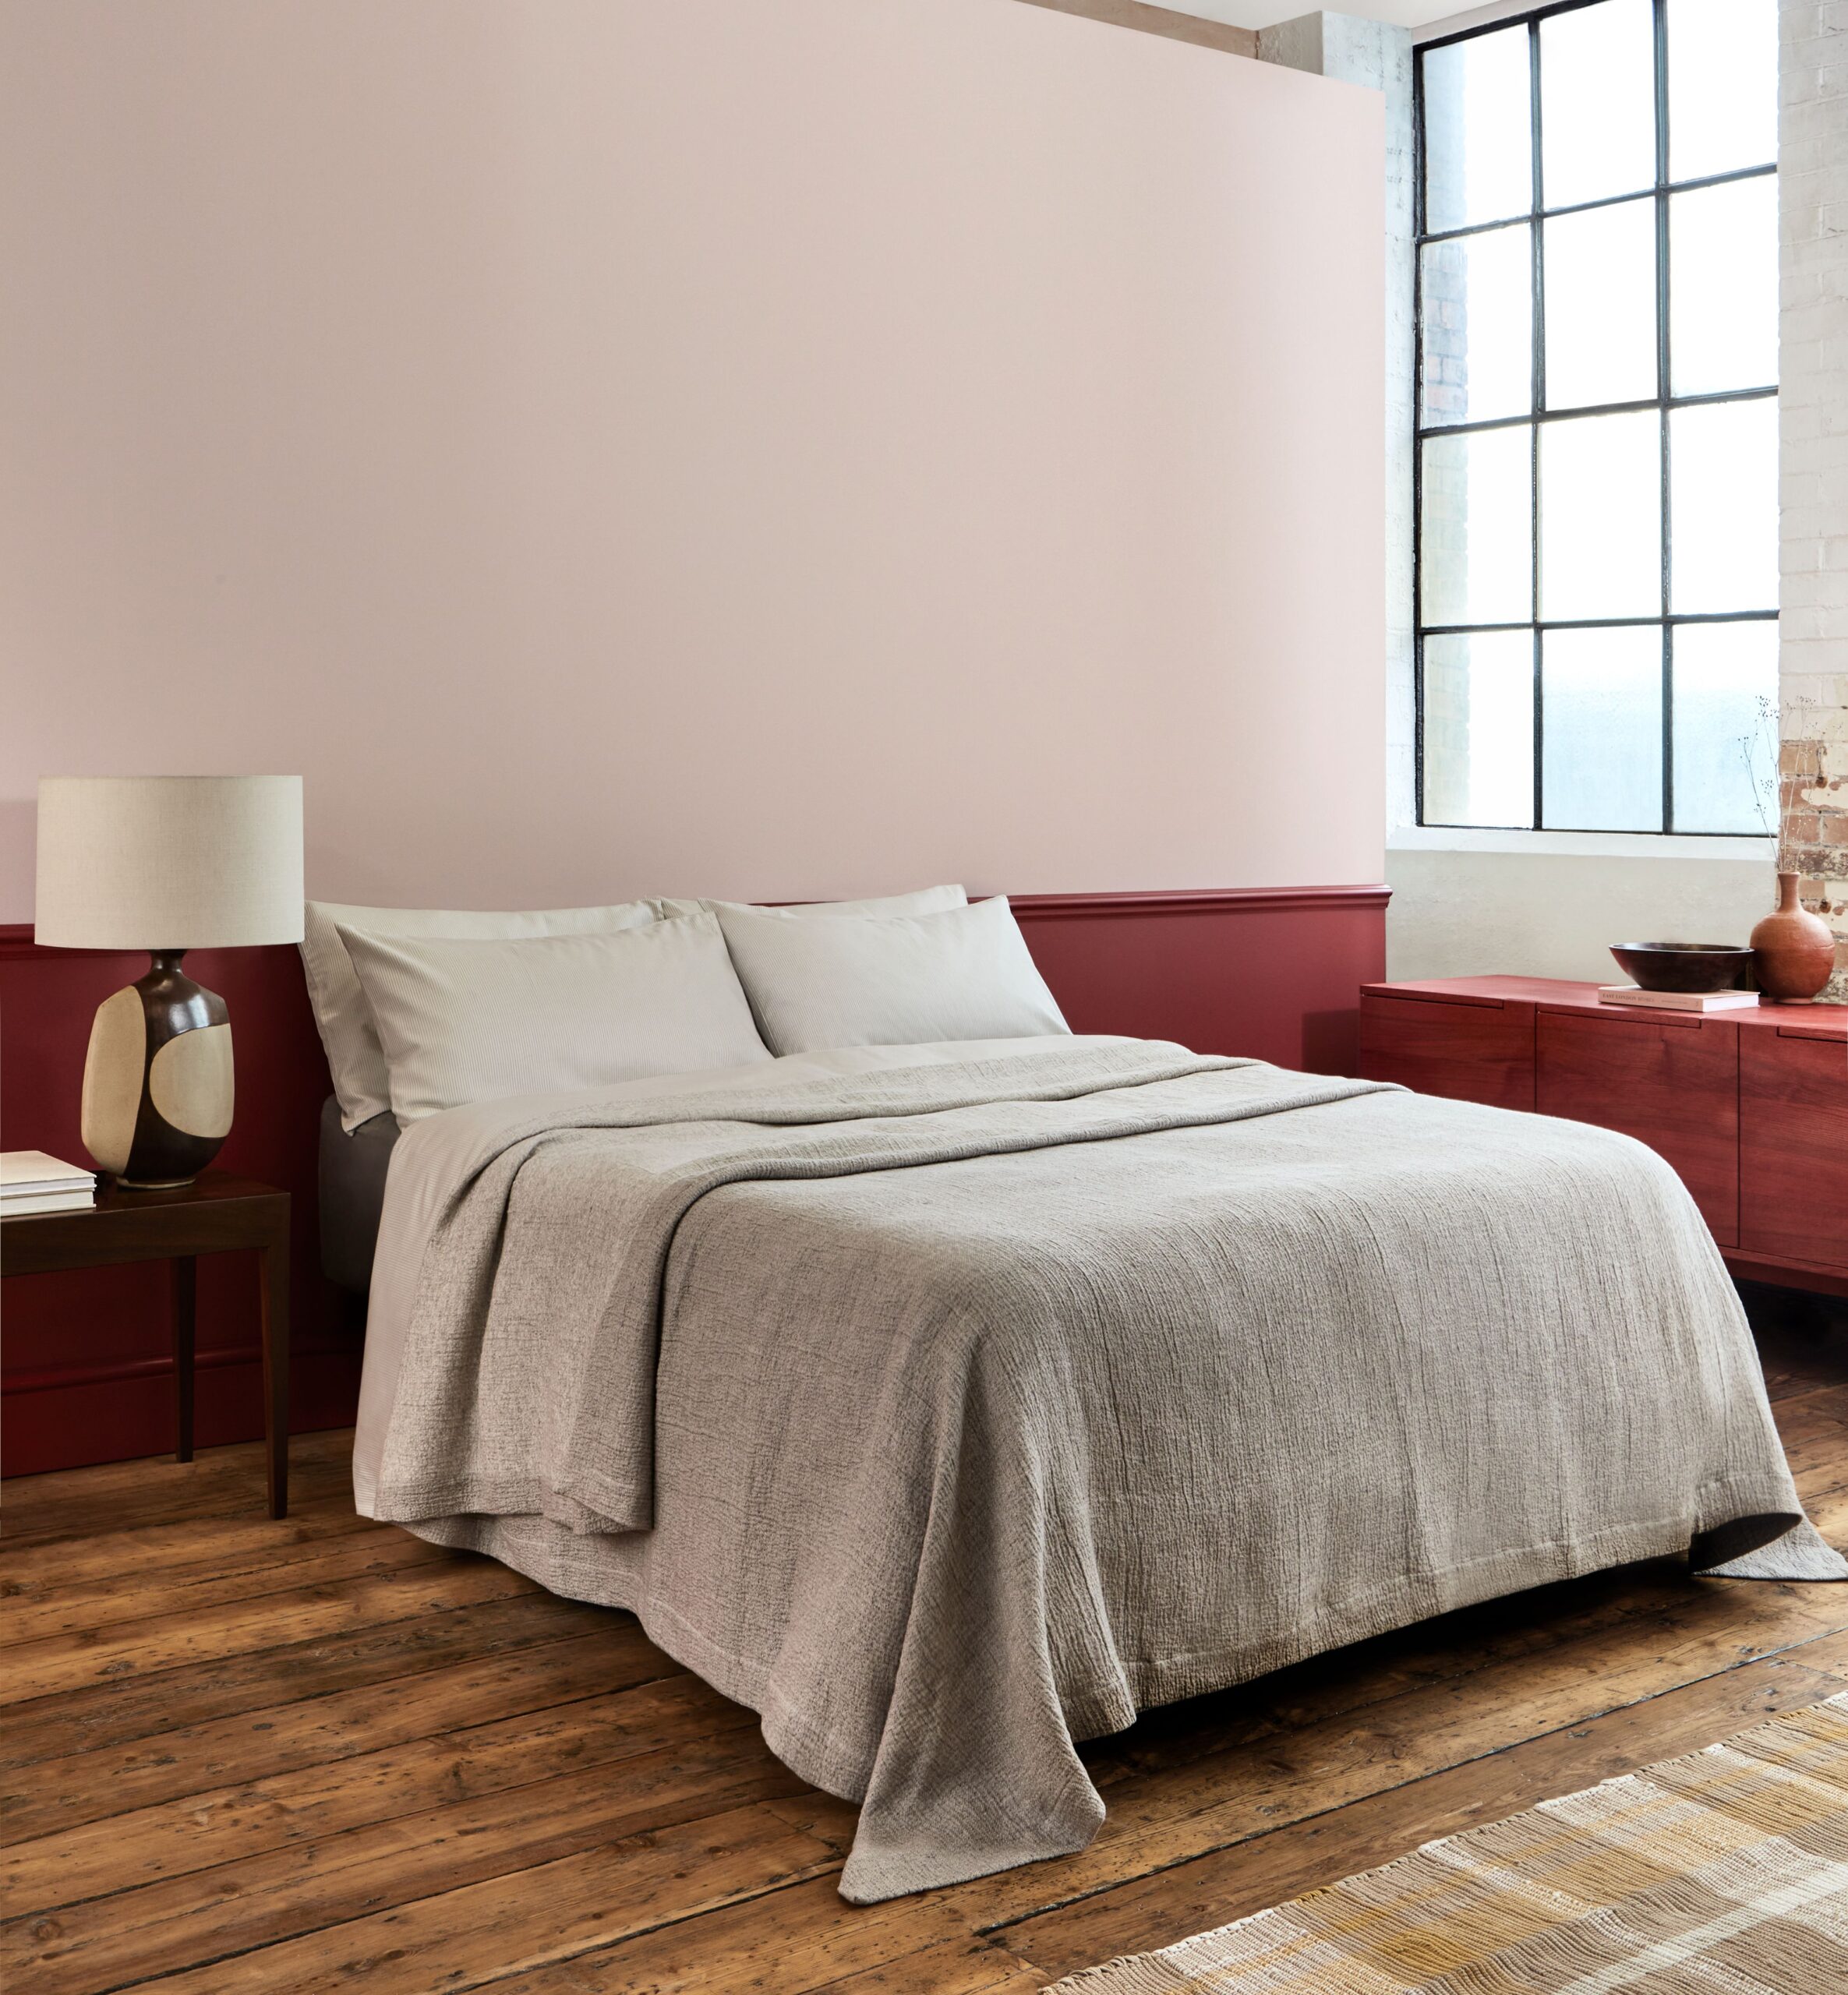 A bedroom with red accents by Mylands Paints